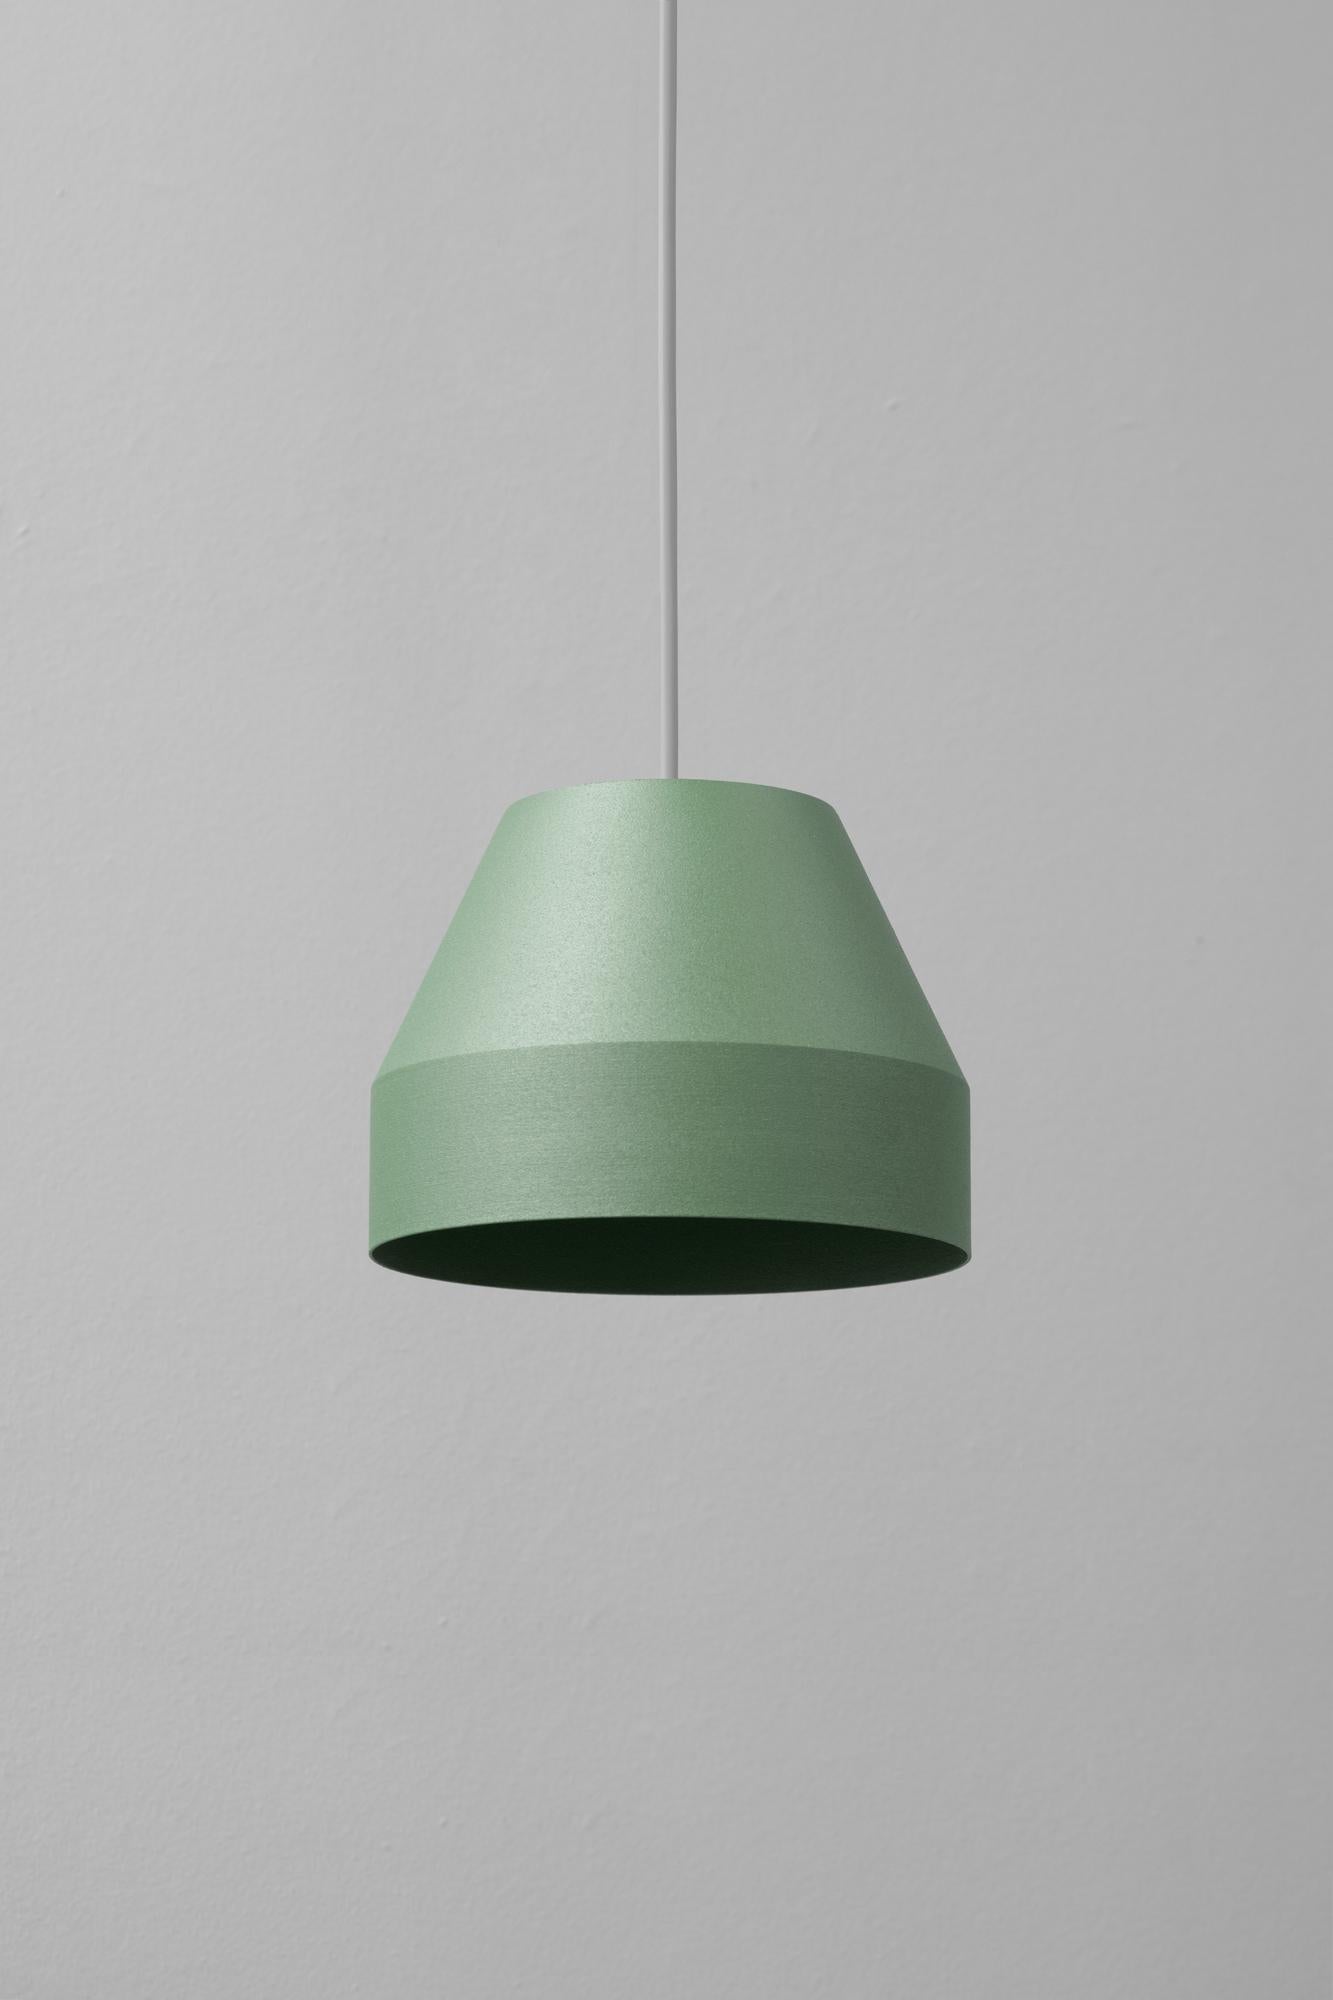 Small Moss Cap Pendant Lamp by +kouple
Dimensions: Ø 16 x H 12 cm. 
Materials: Powder-coated steel.

Available in different color options. The rod length is 200 cm. Please contact us.

All our lamps can be wired according to each country. If sold to